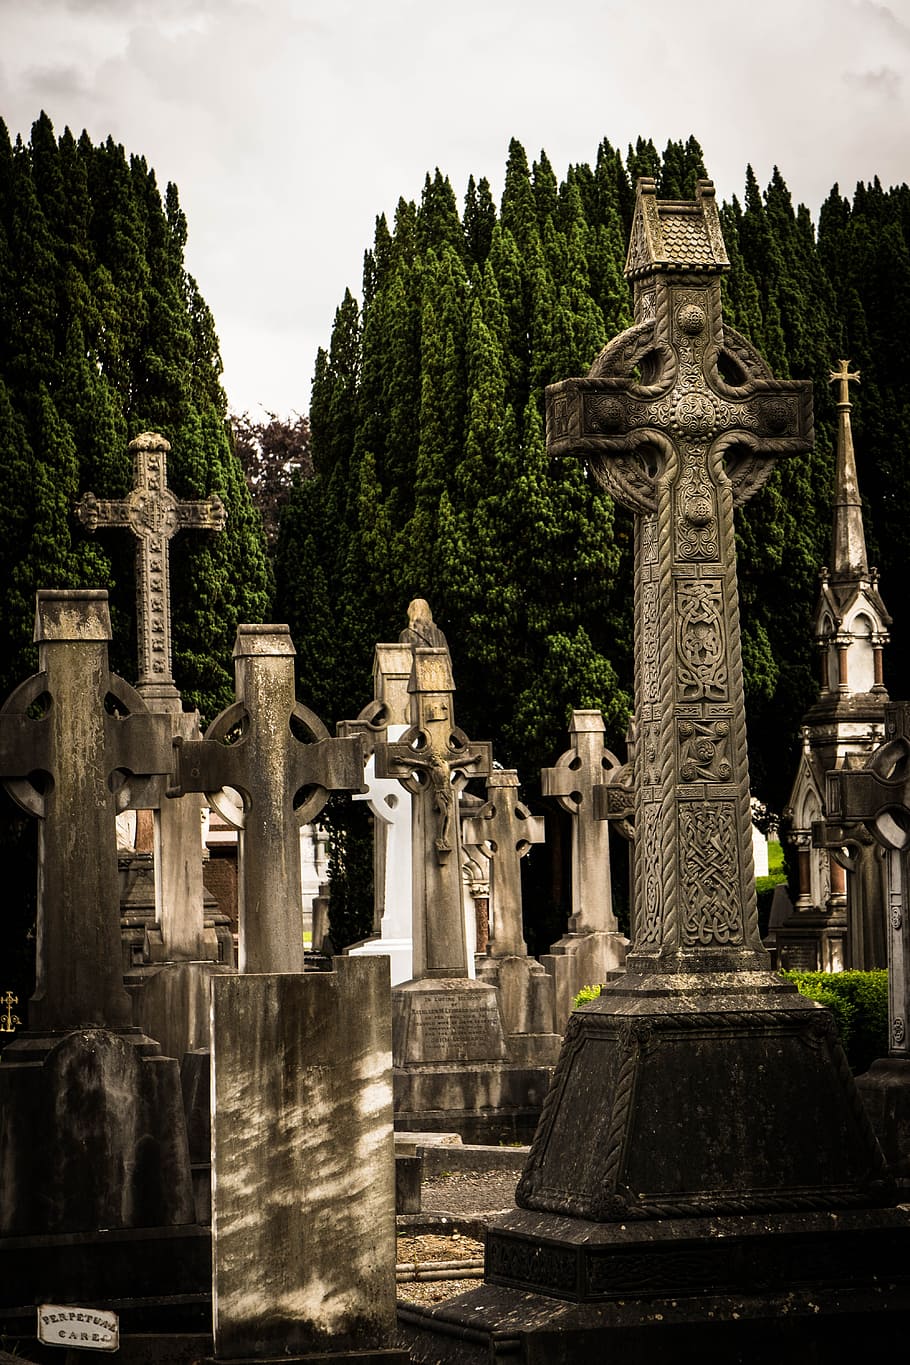 glasnevin, dublin, ireland, cemetery, cross, celtic, funeral, mourning, a place to rest, tombstone